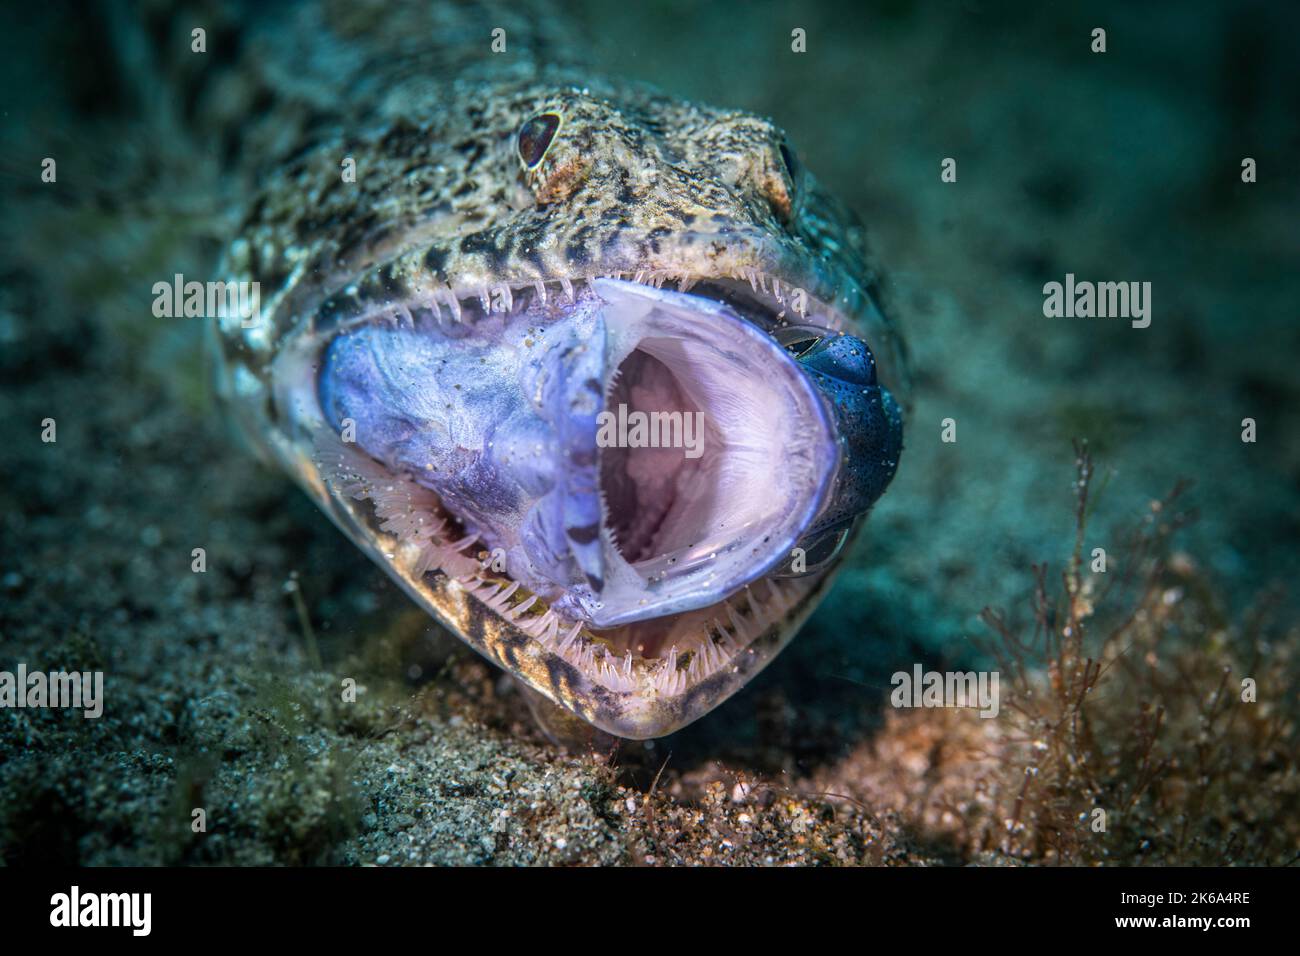 A lizardfish makes a meal out of a damselfish, Anilao, Philippines. Stock Photo